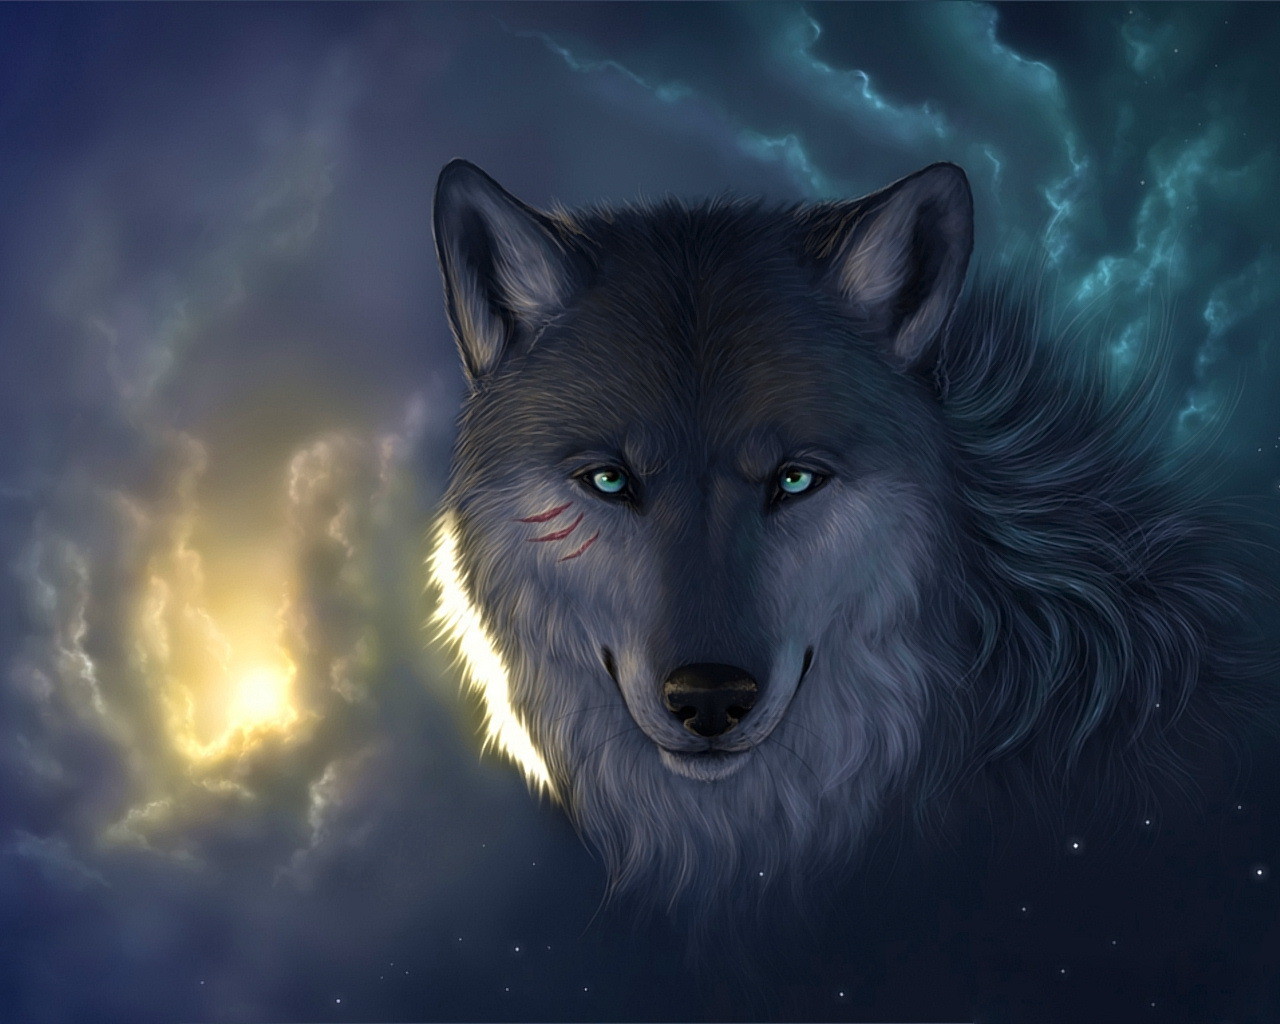 Wallpaper Wolf And Other Nature Desktop